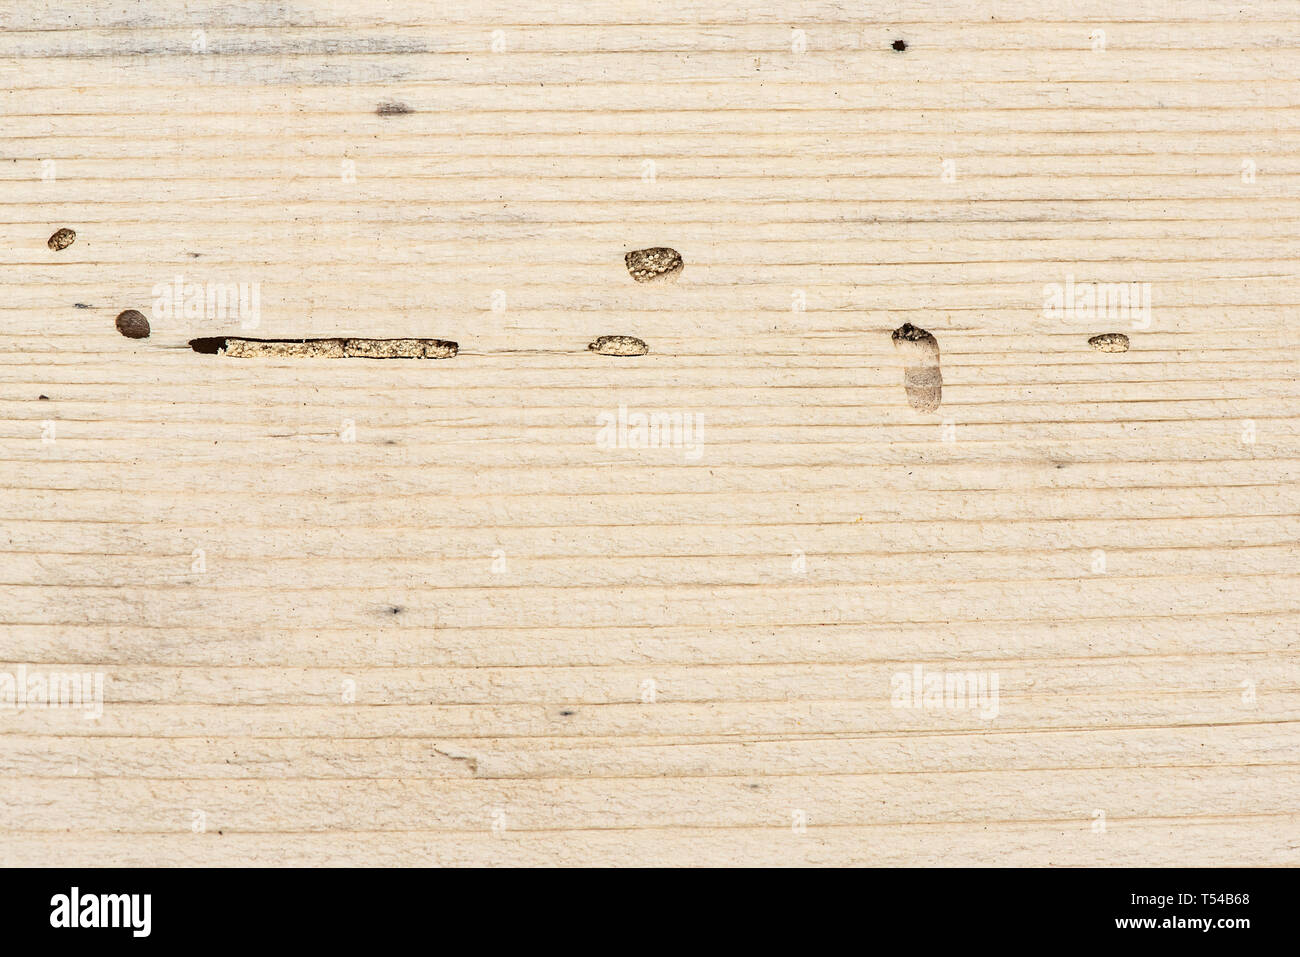 Longitudinal section of coniferous wood with traces of insect pest. Scolytus bark beetle traces on wood, top view Stock Photo